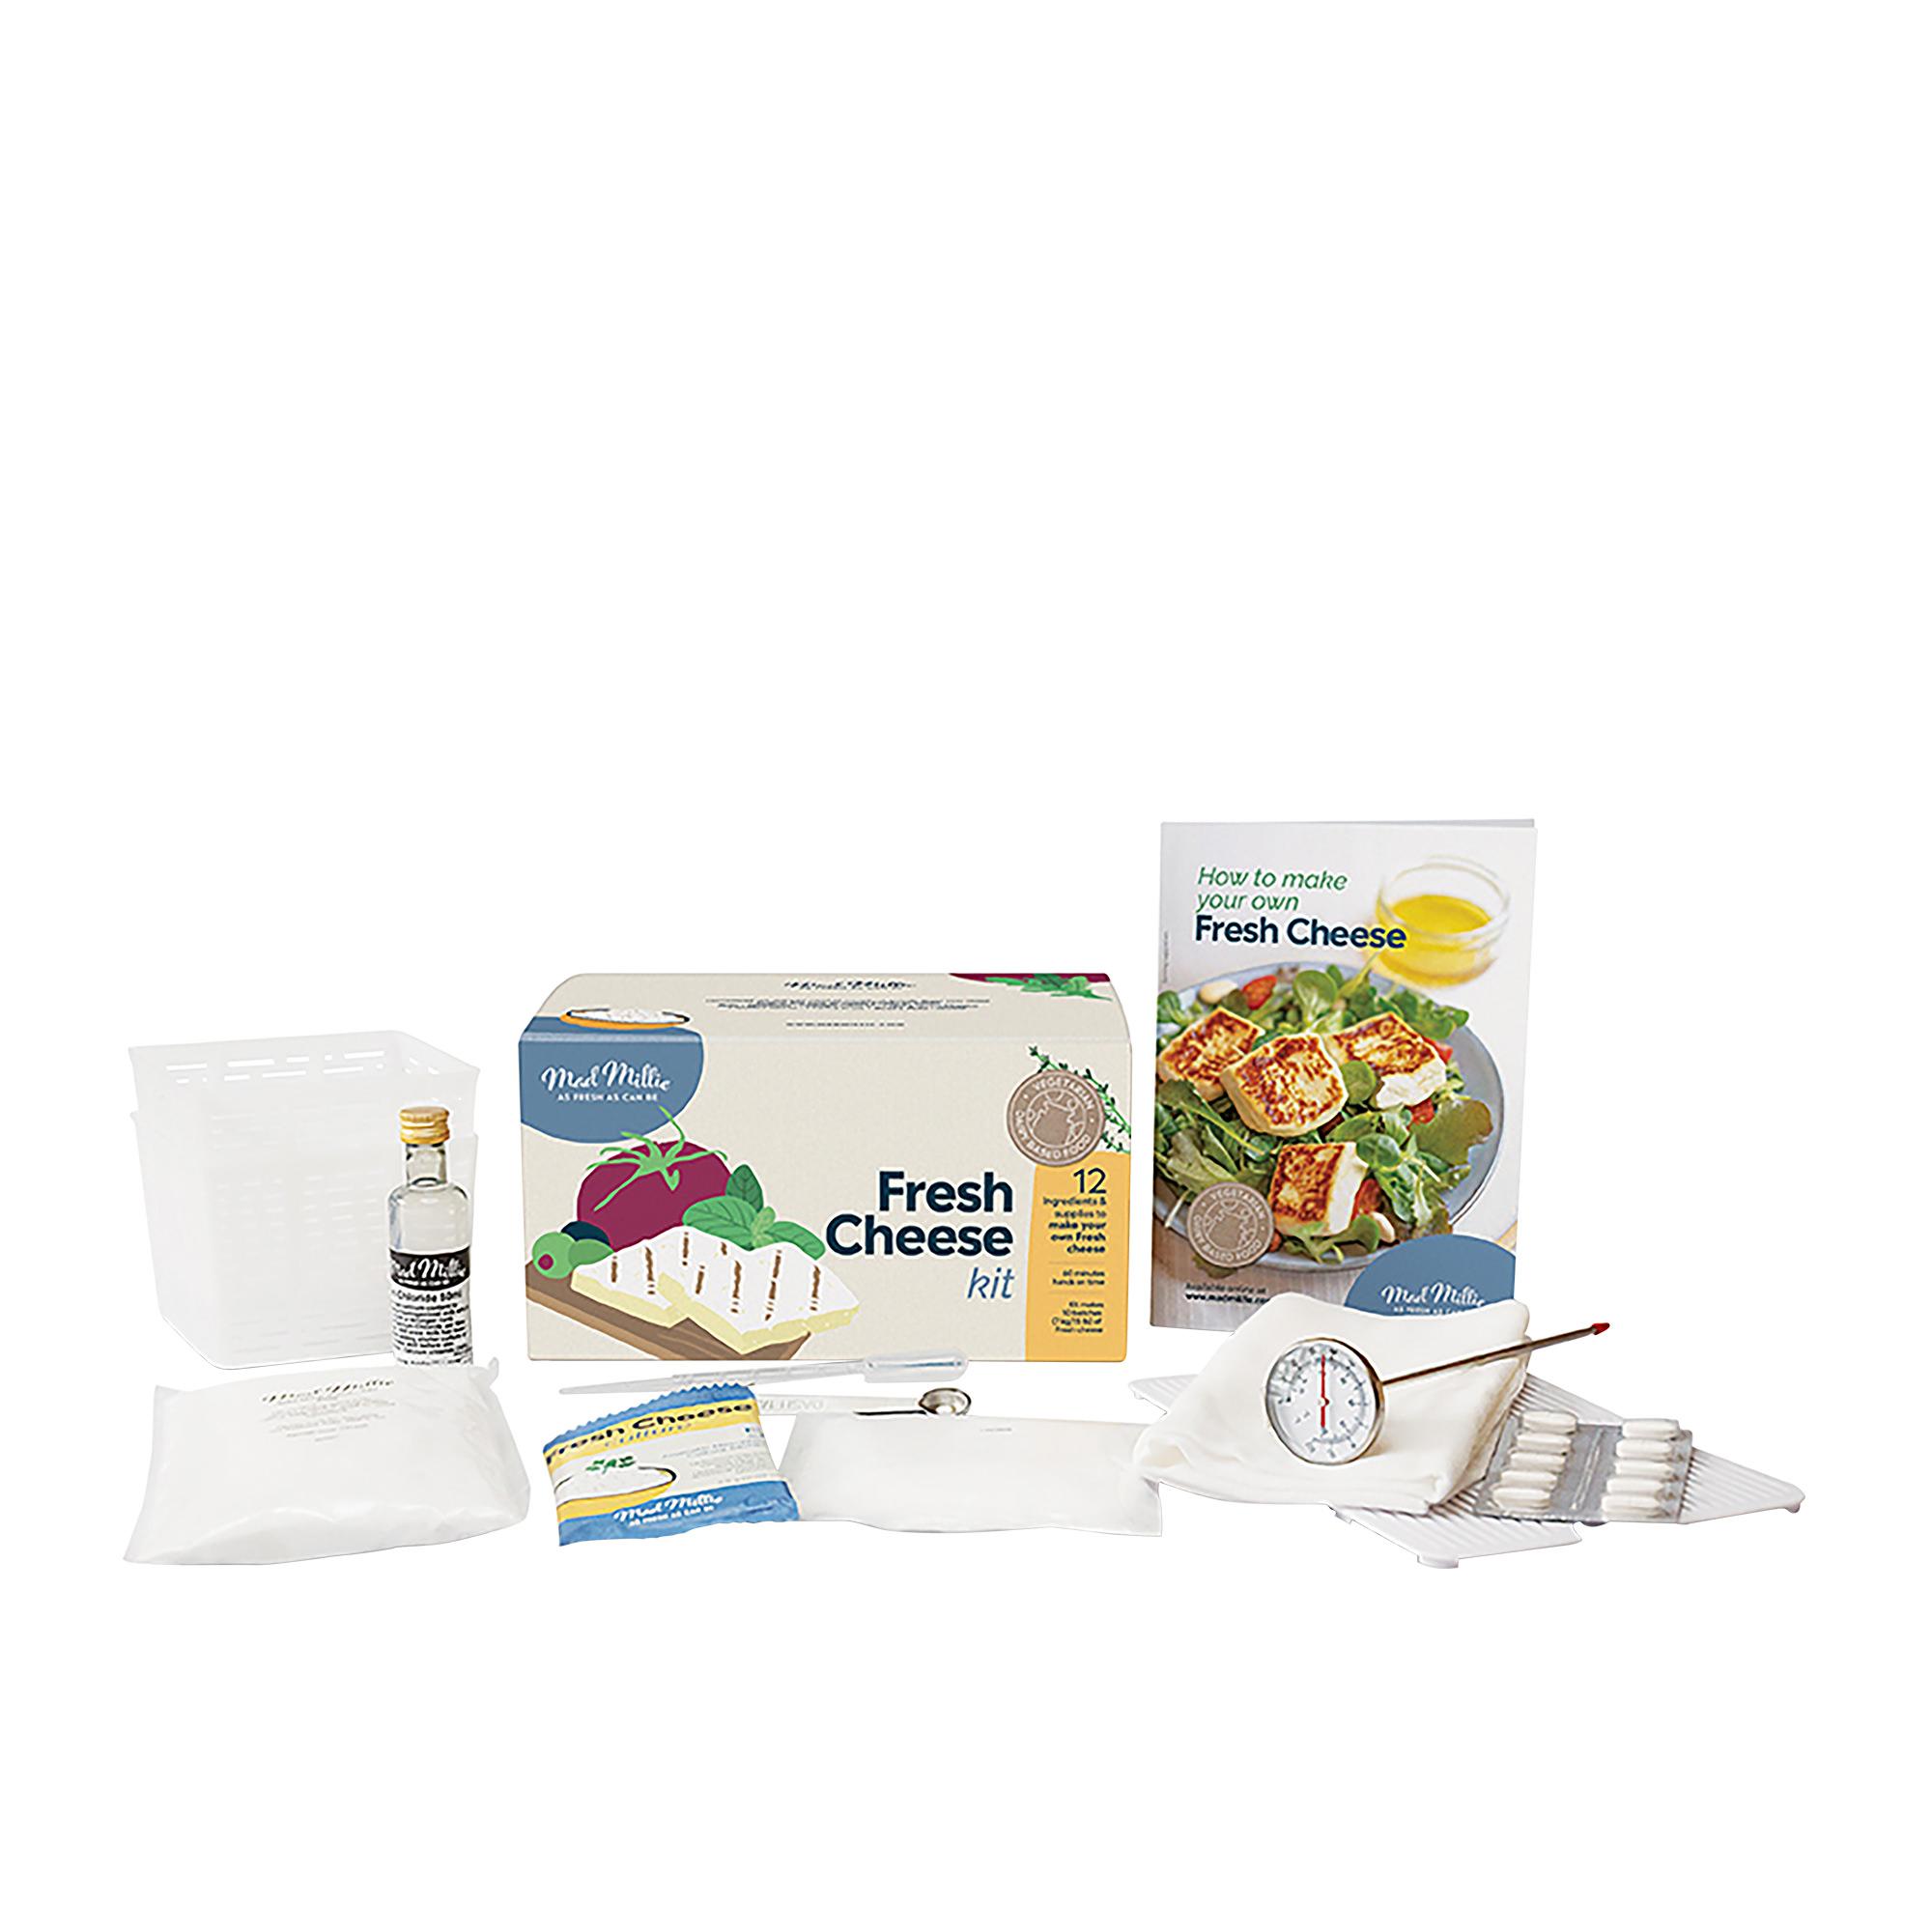 Mad Millie Fresh Cheese Complete Kit Image 1